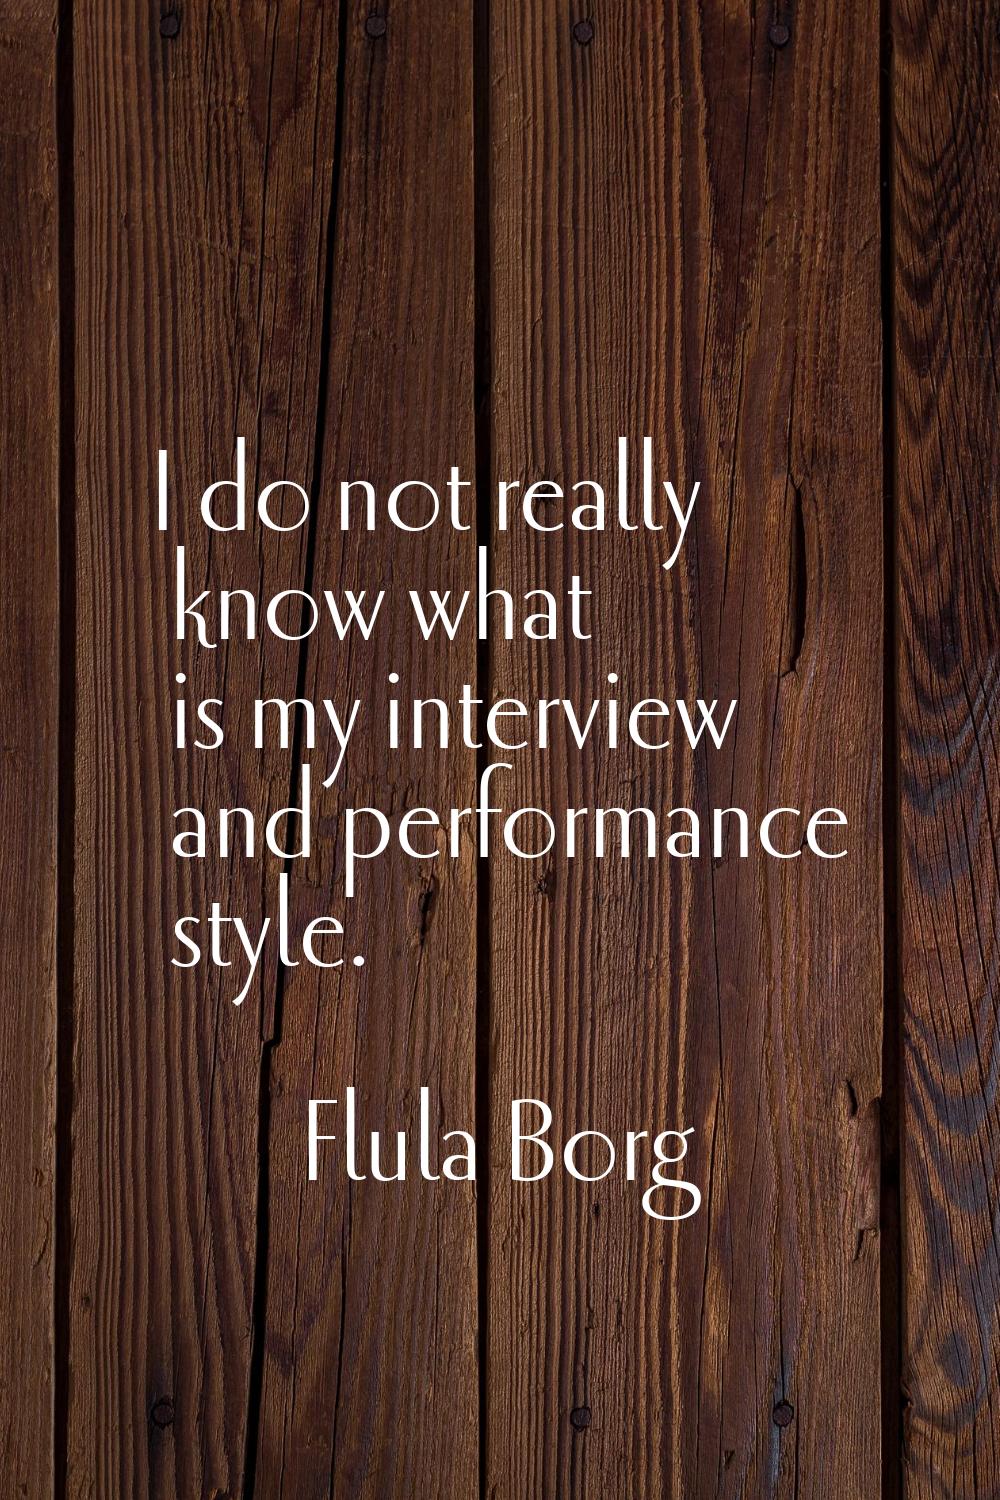 I do not really know what is my interview and performance style.